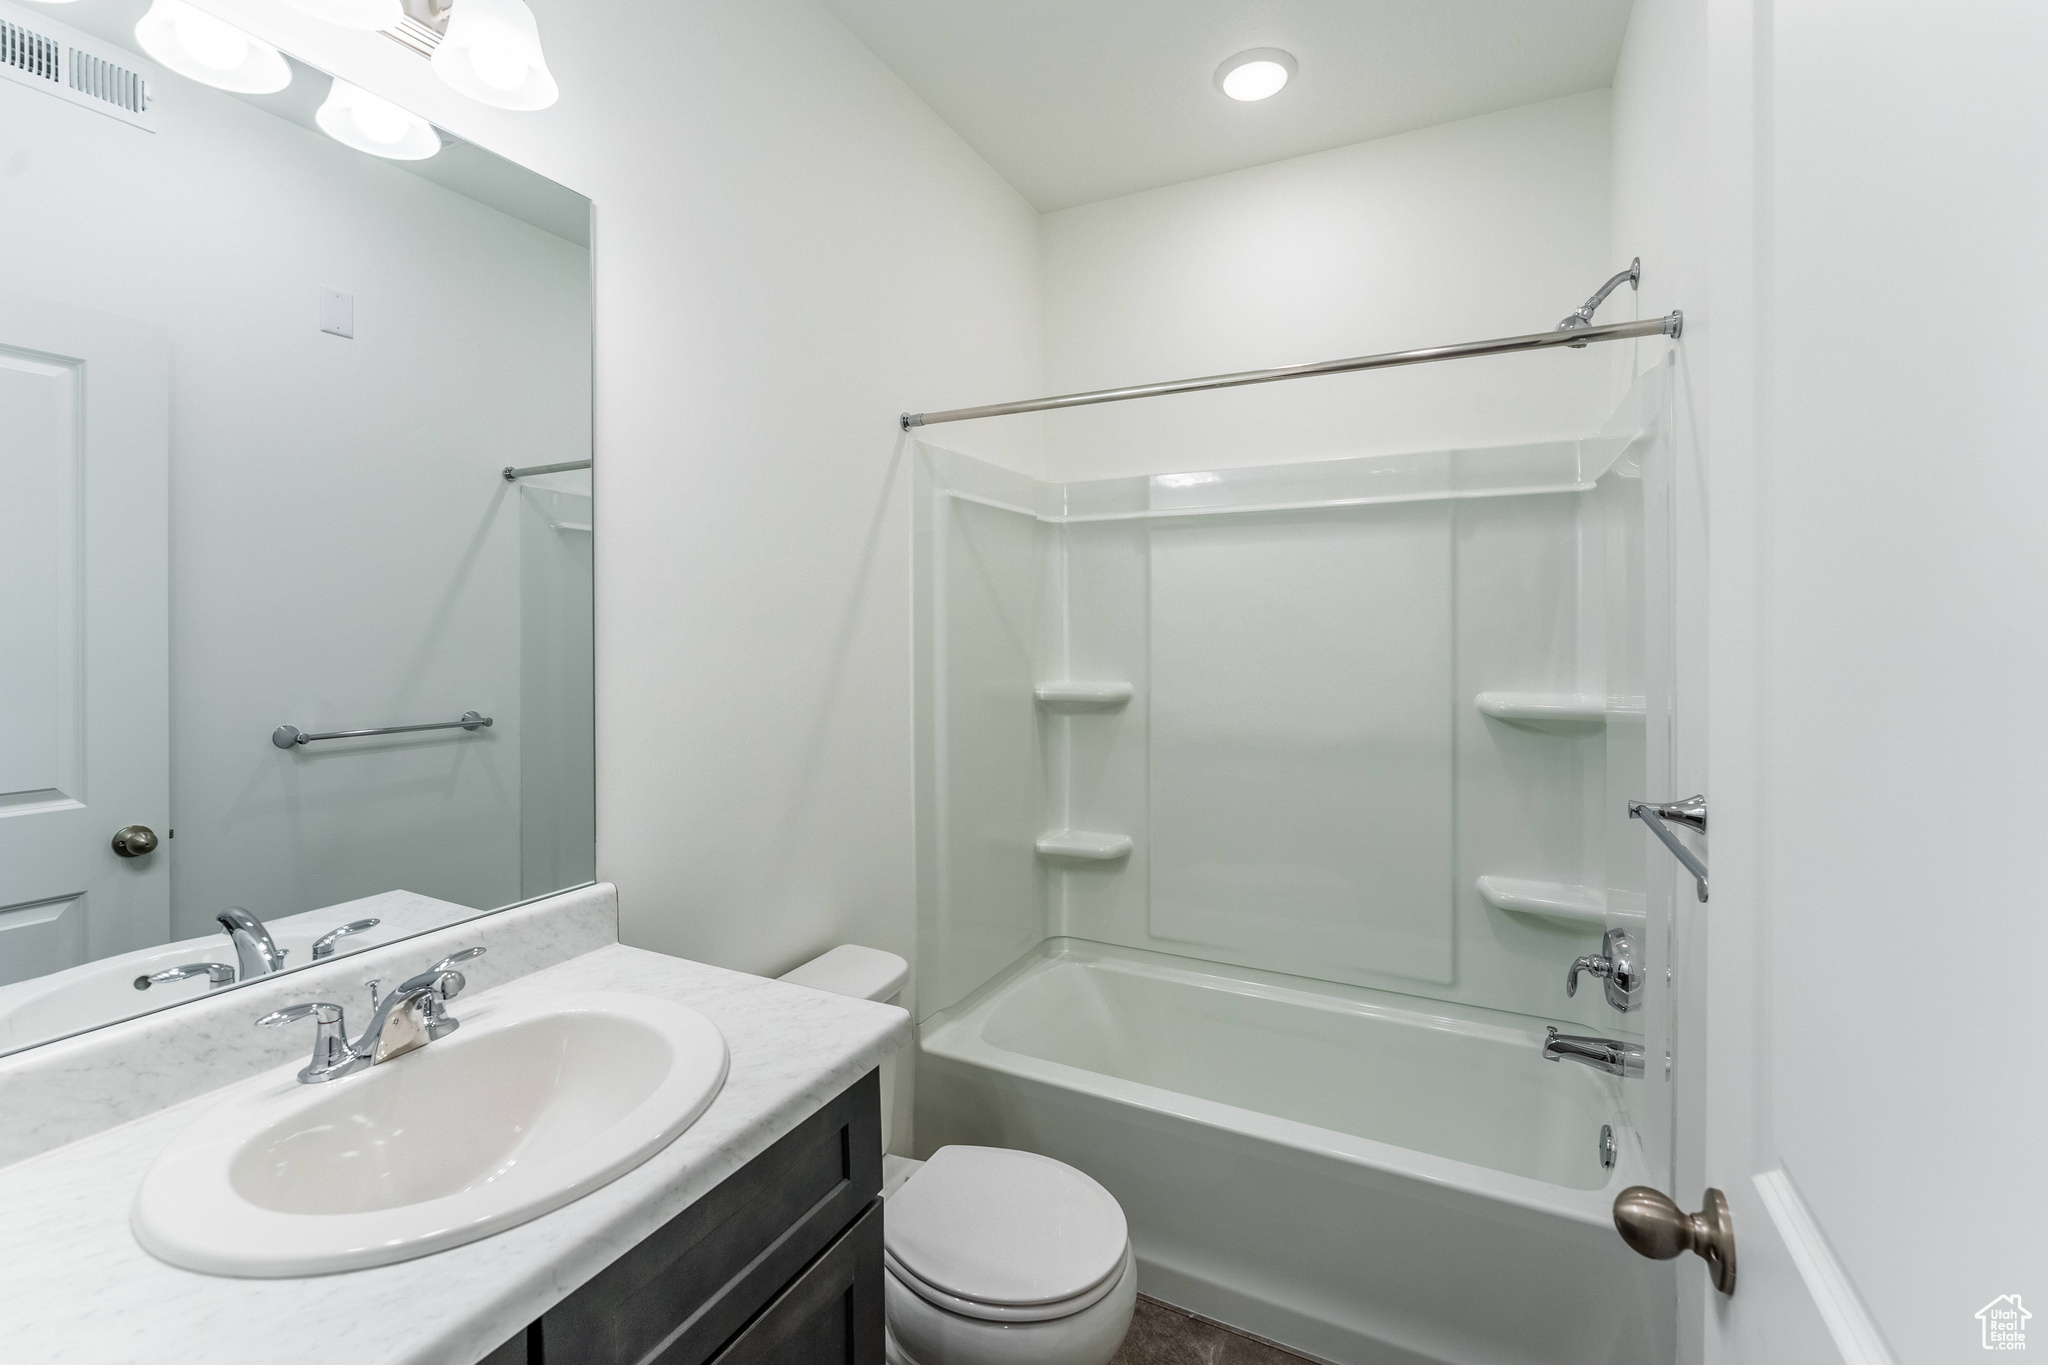 Full bathroom with shower / washtub combination, vanity, and toilet